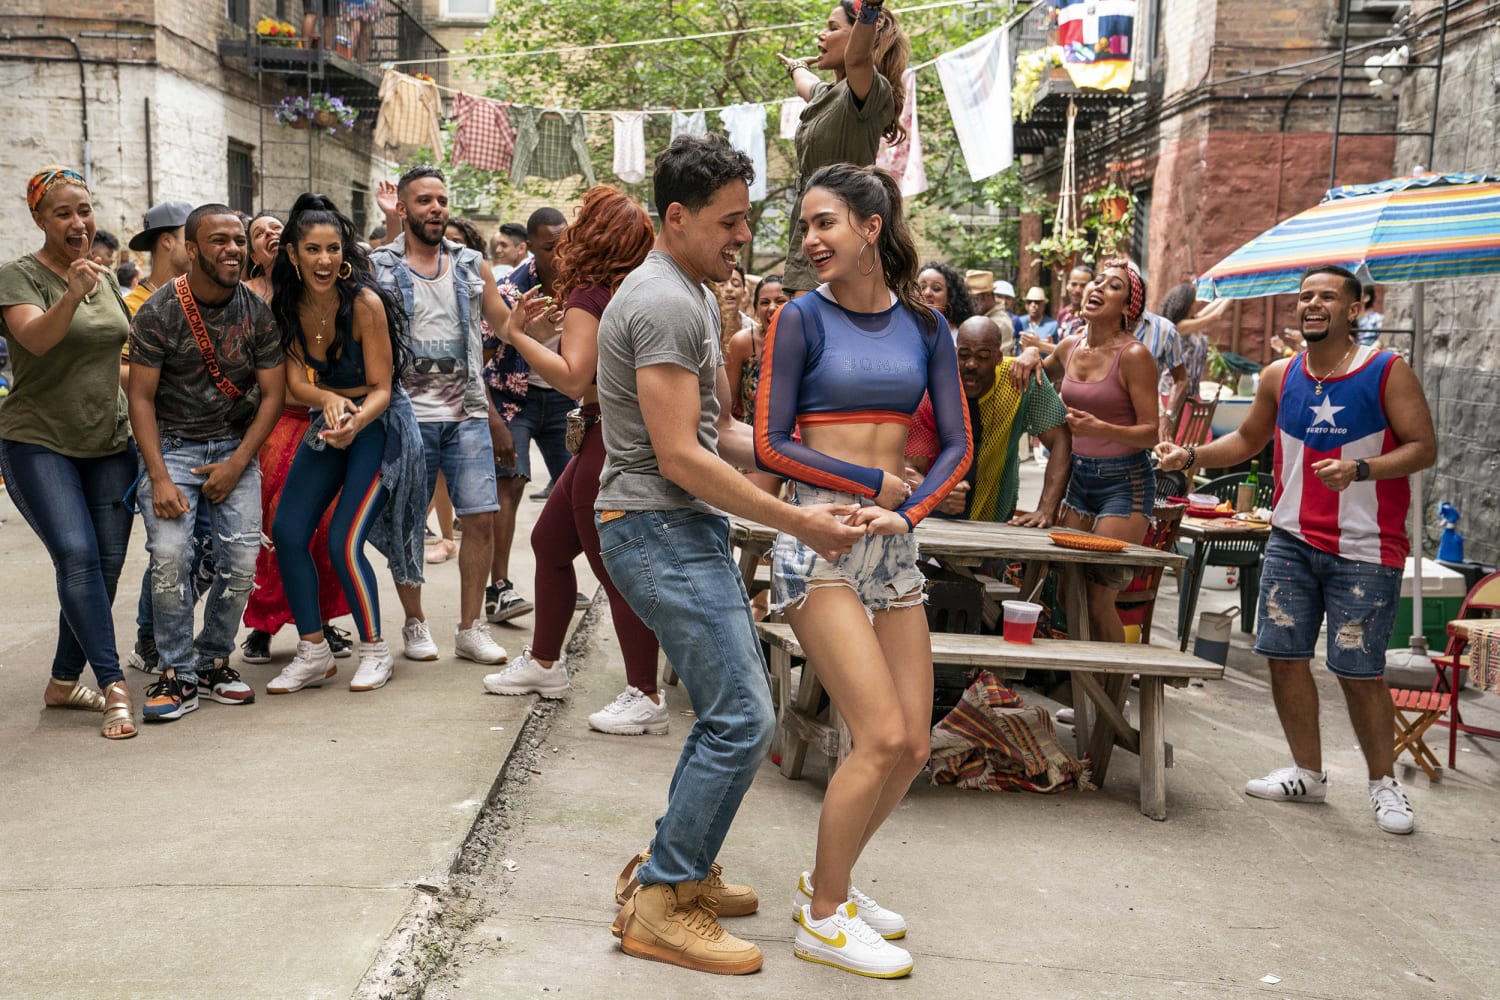 New In The Heights Movie Trailer Teases Prideful Moment Of Latino Visibility Cast Says